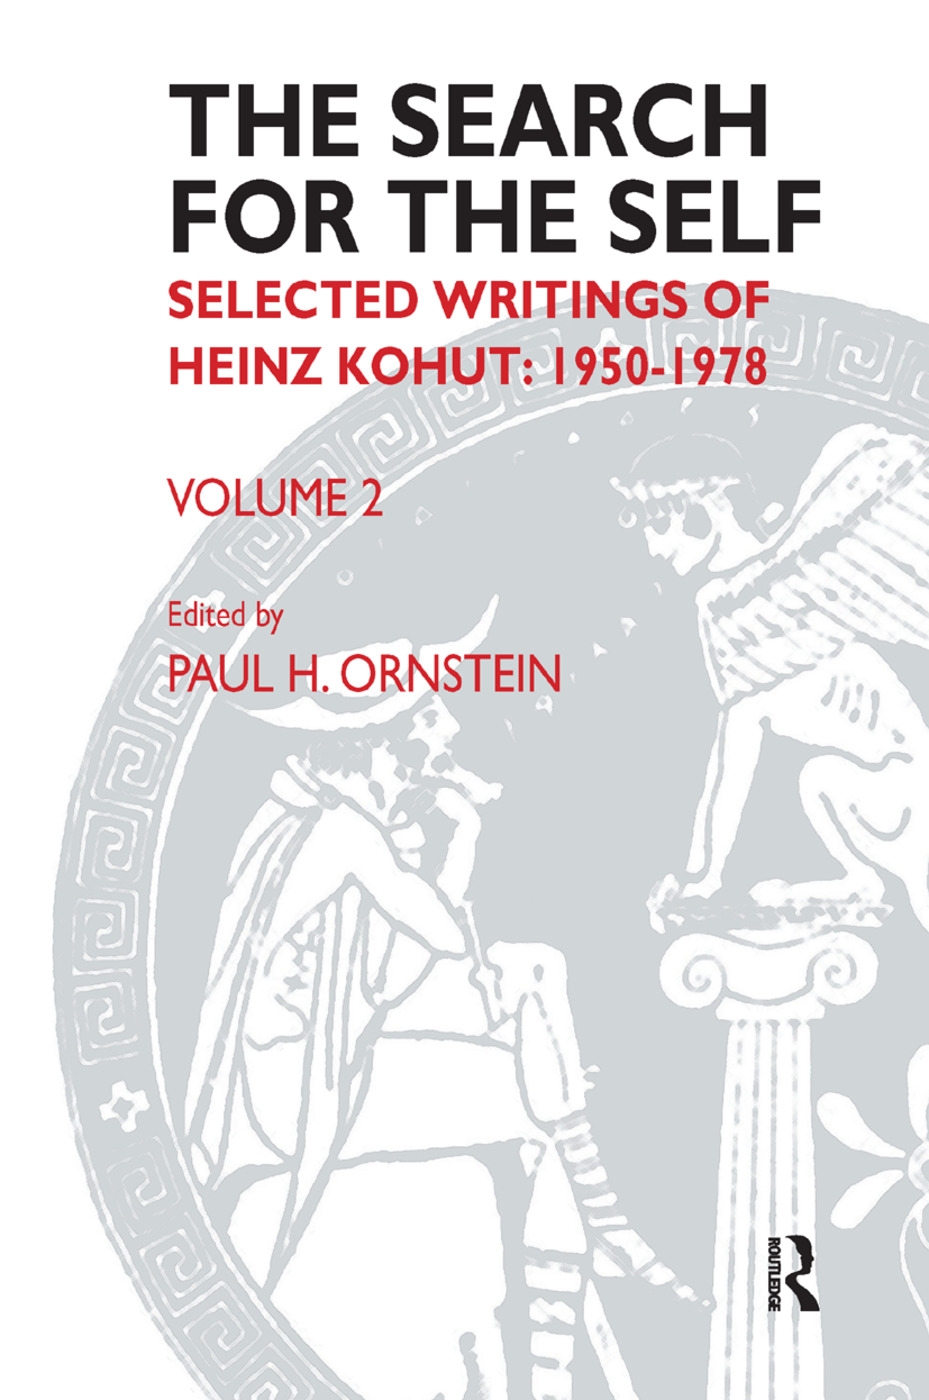 The Search for the Self: Selected Writings of Heinz Kohut: 1950-1978